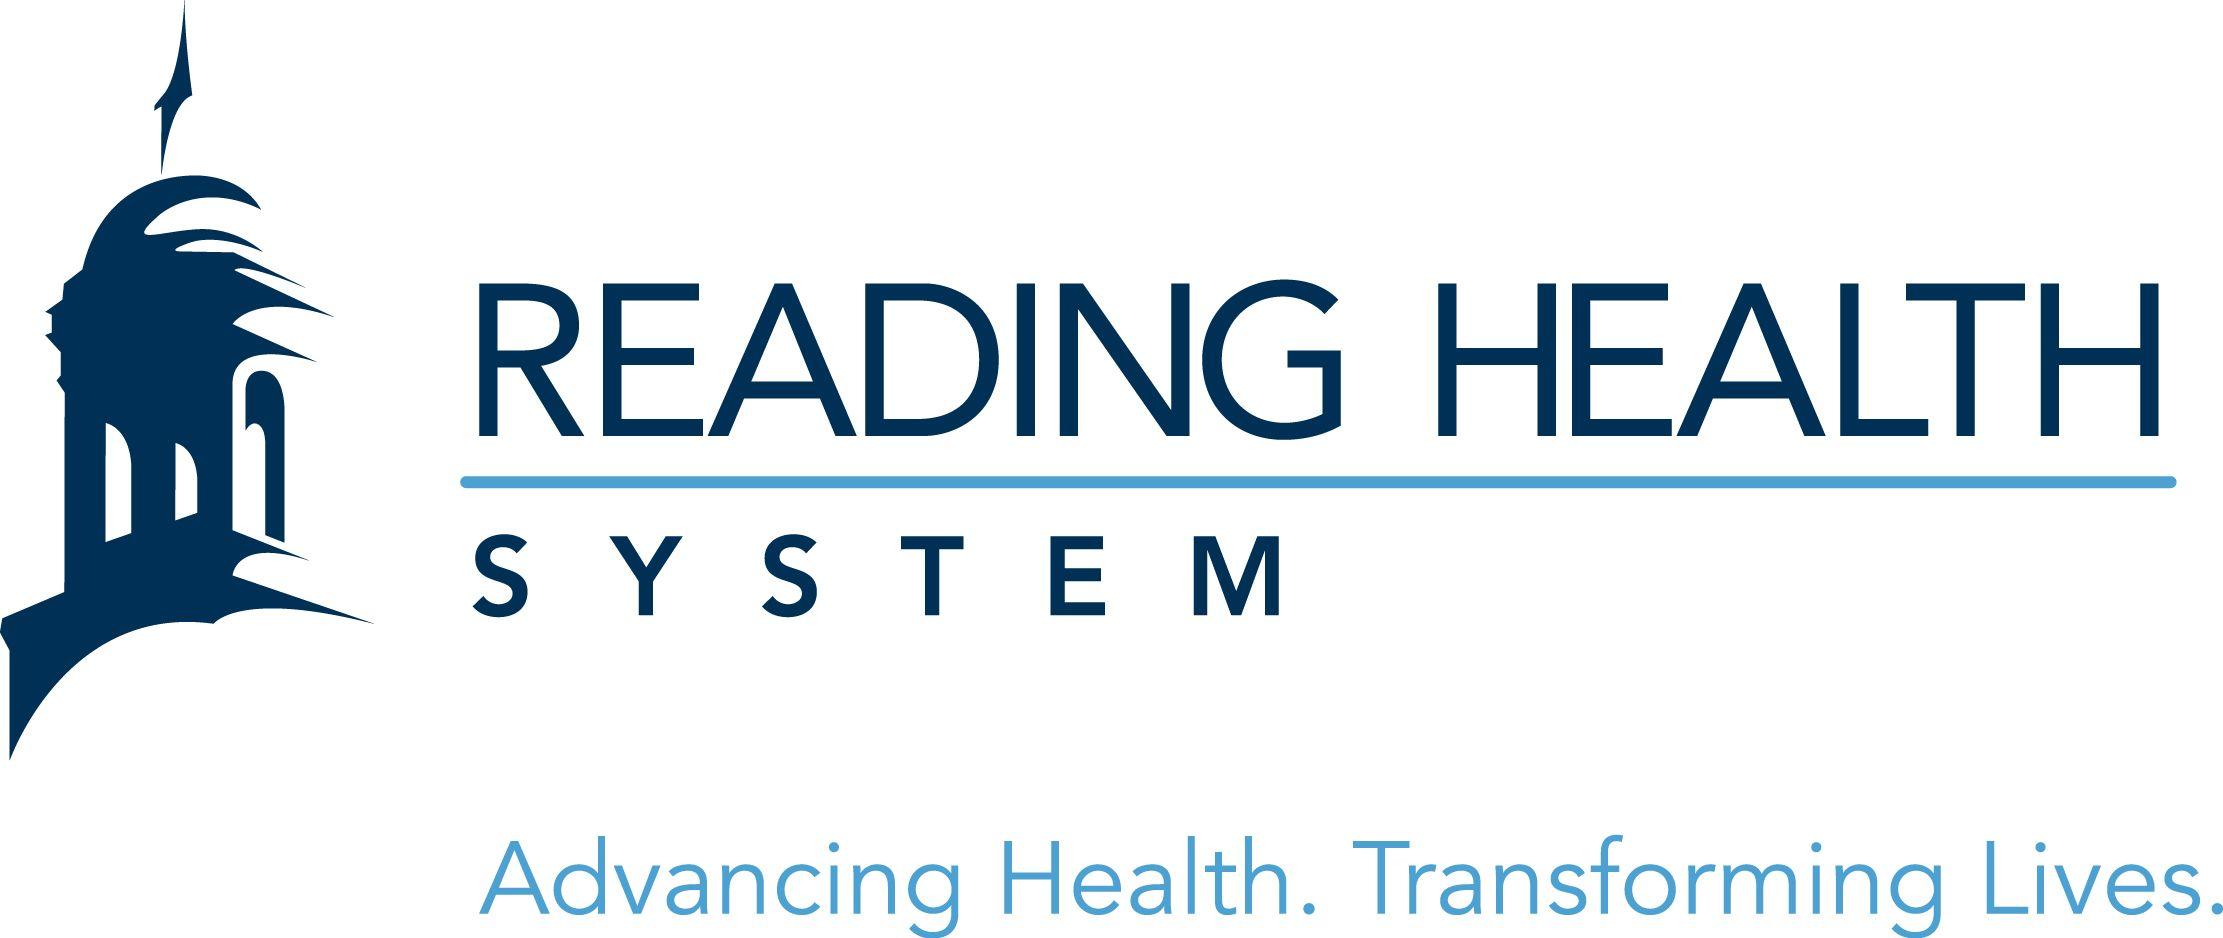 Reading Health System Logo - Creating new healthcare brand energy: Reading Health System